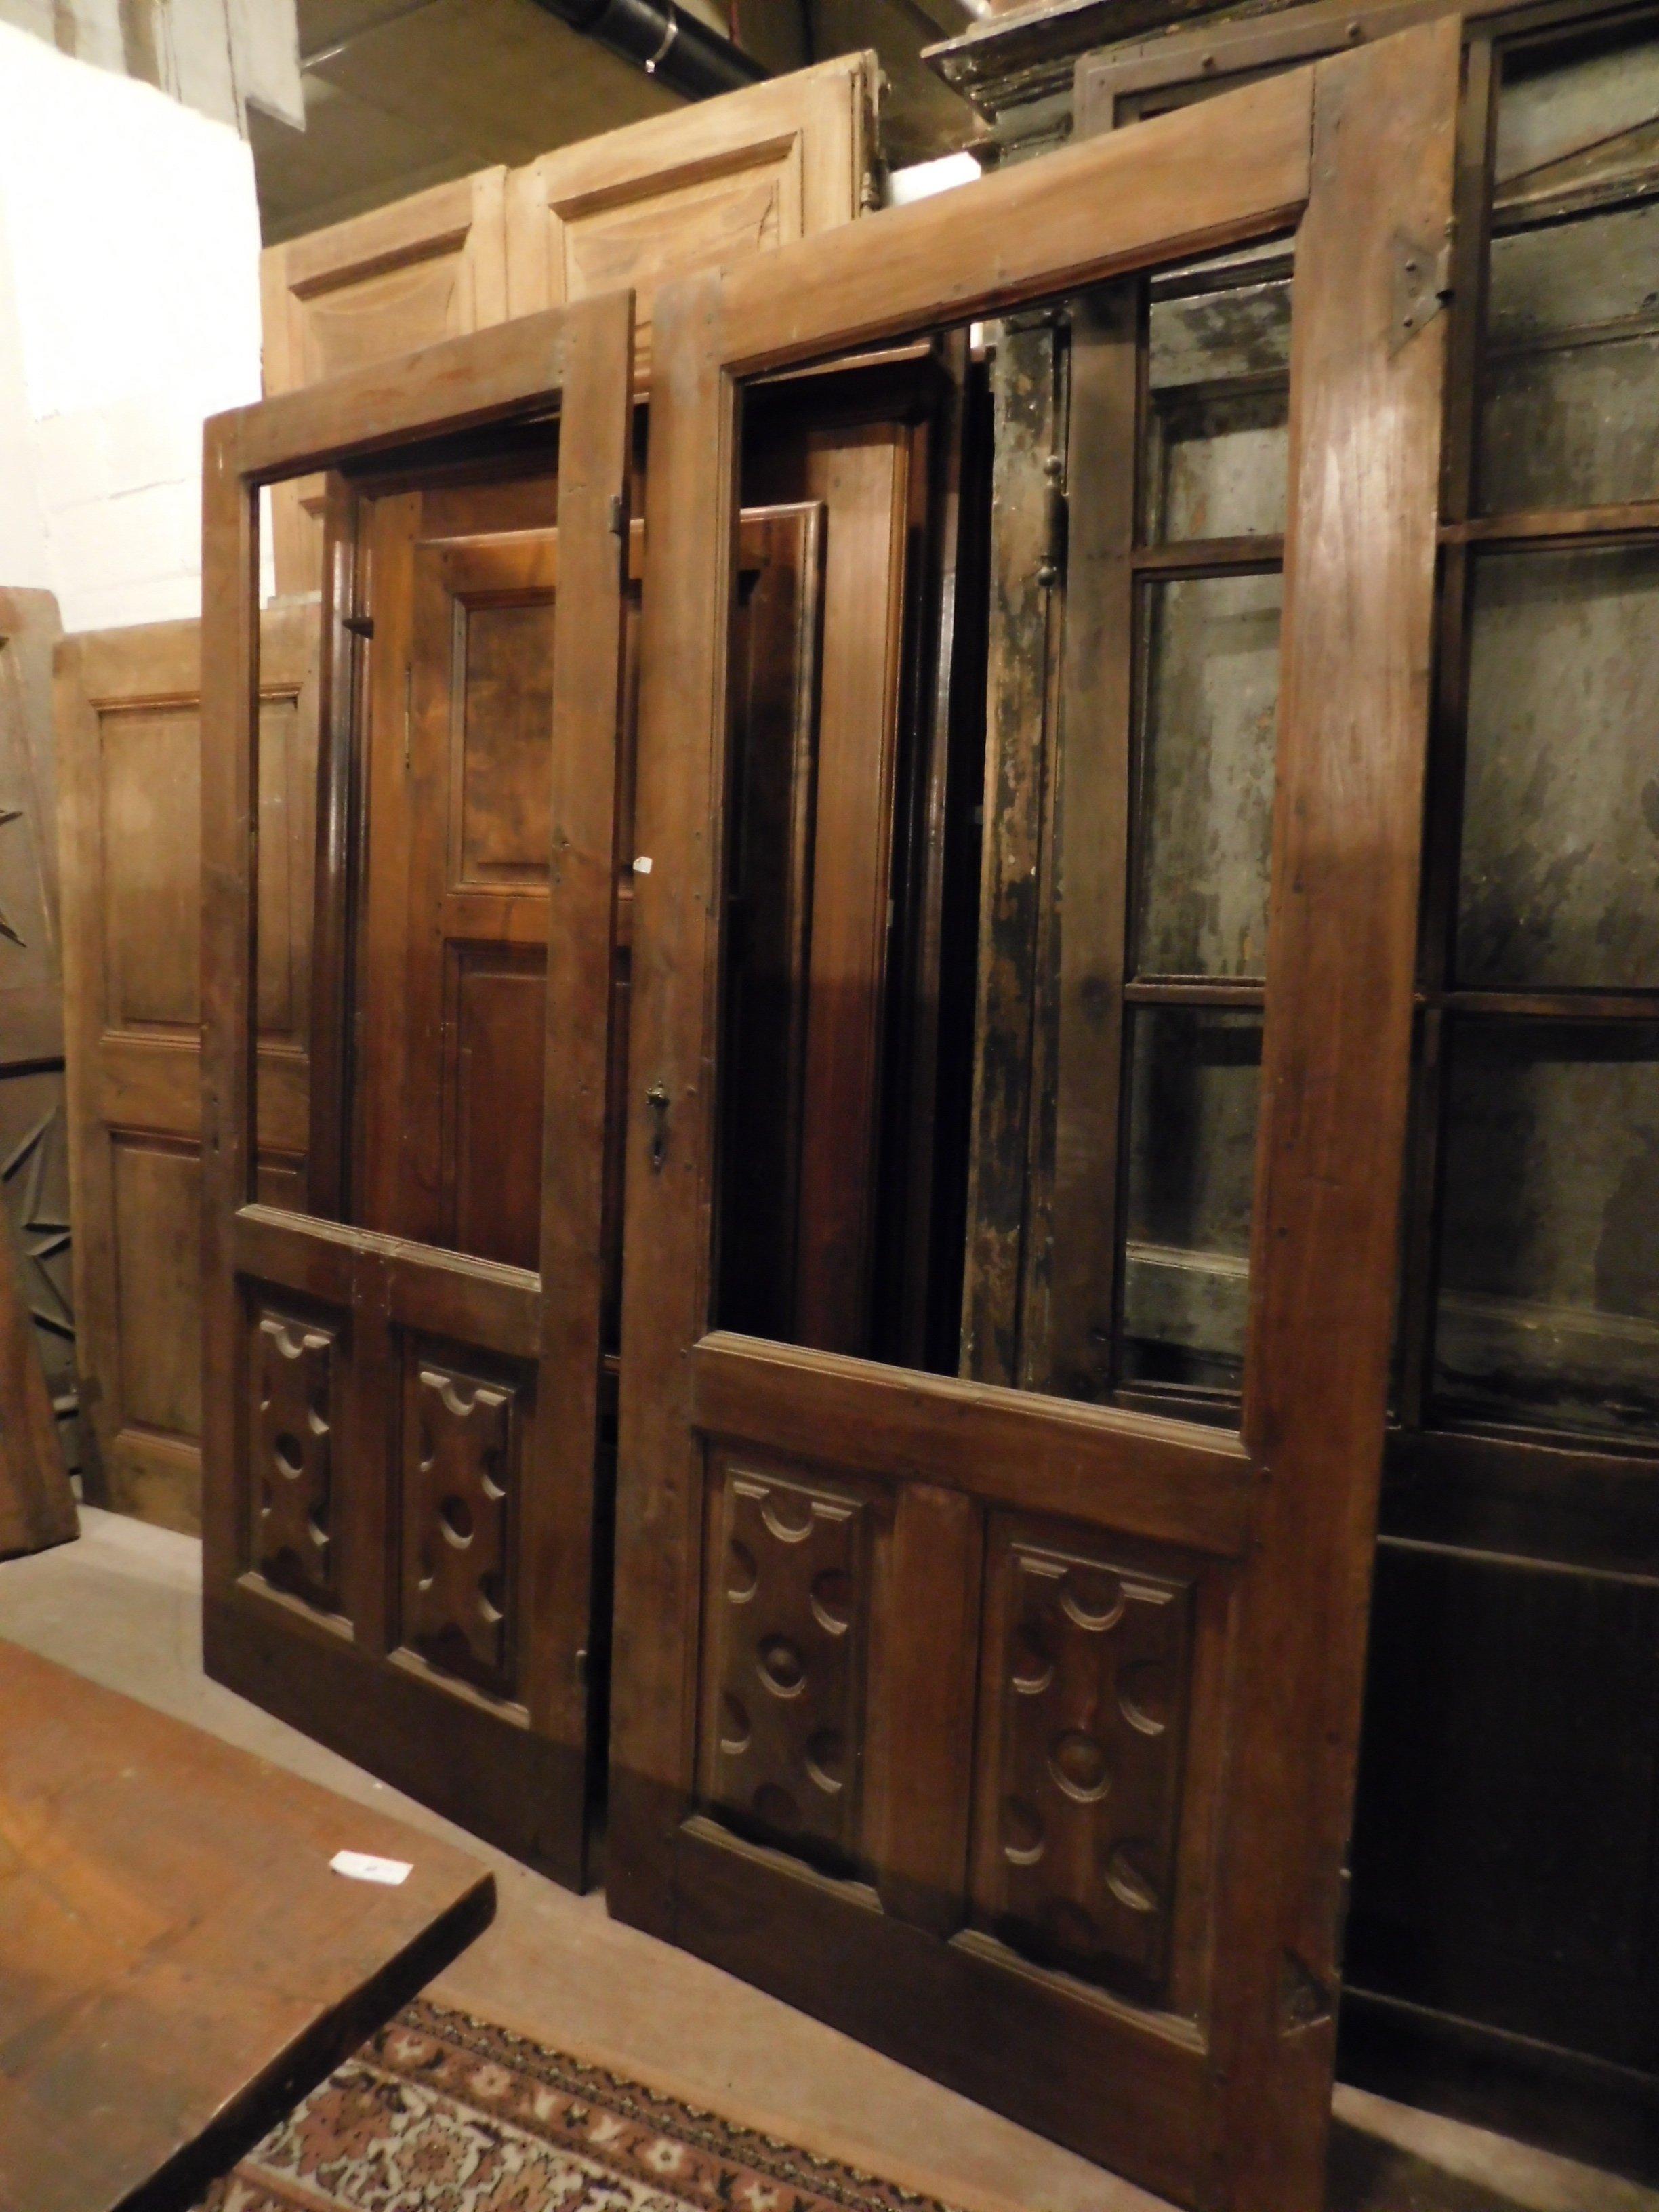 2 antique glass doors, with poplar wood structure, with richly hand carved panel, sold without glass and irons, so that you can adapt it as you want, perfect structure and of great value, hand-built in the 1700 for kitchen in Northern Italy.
They